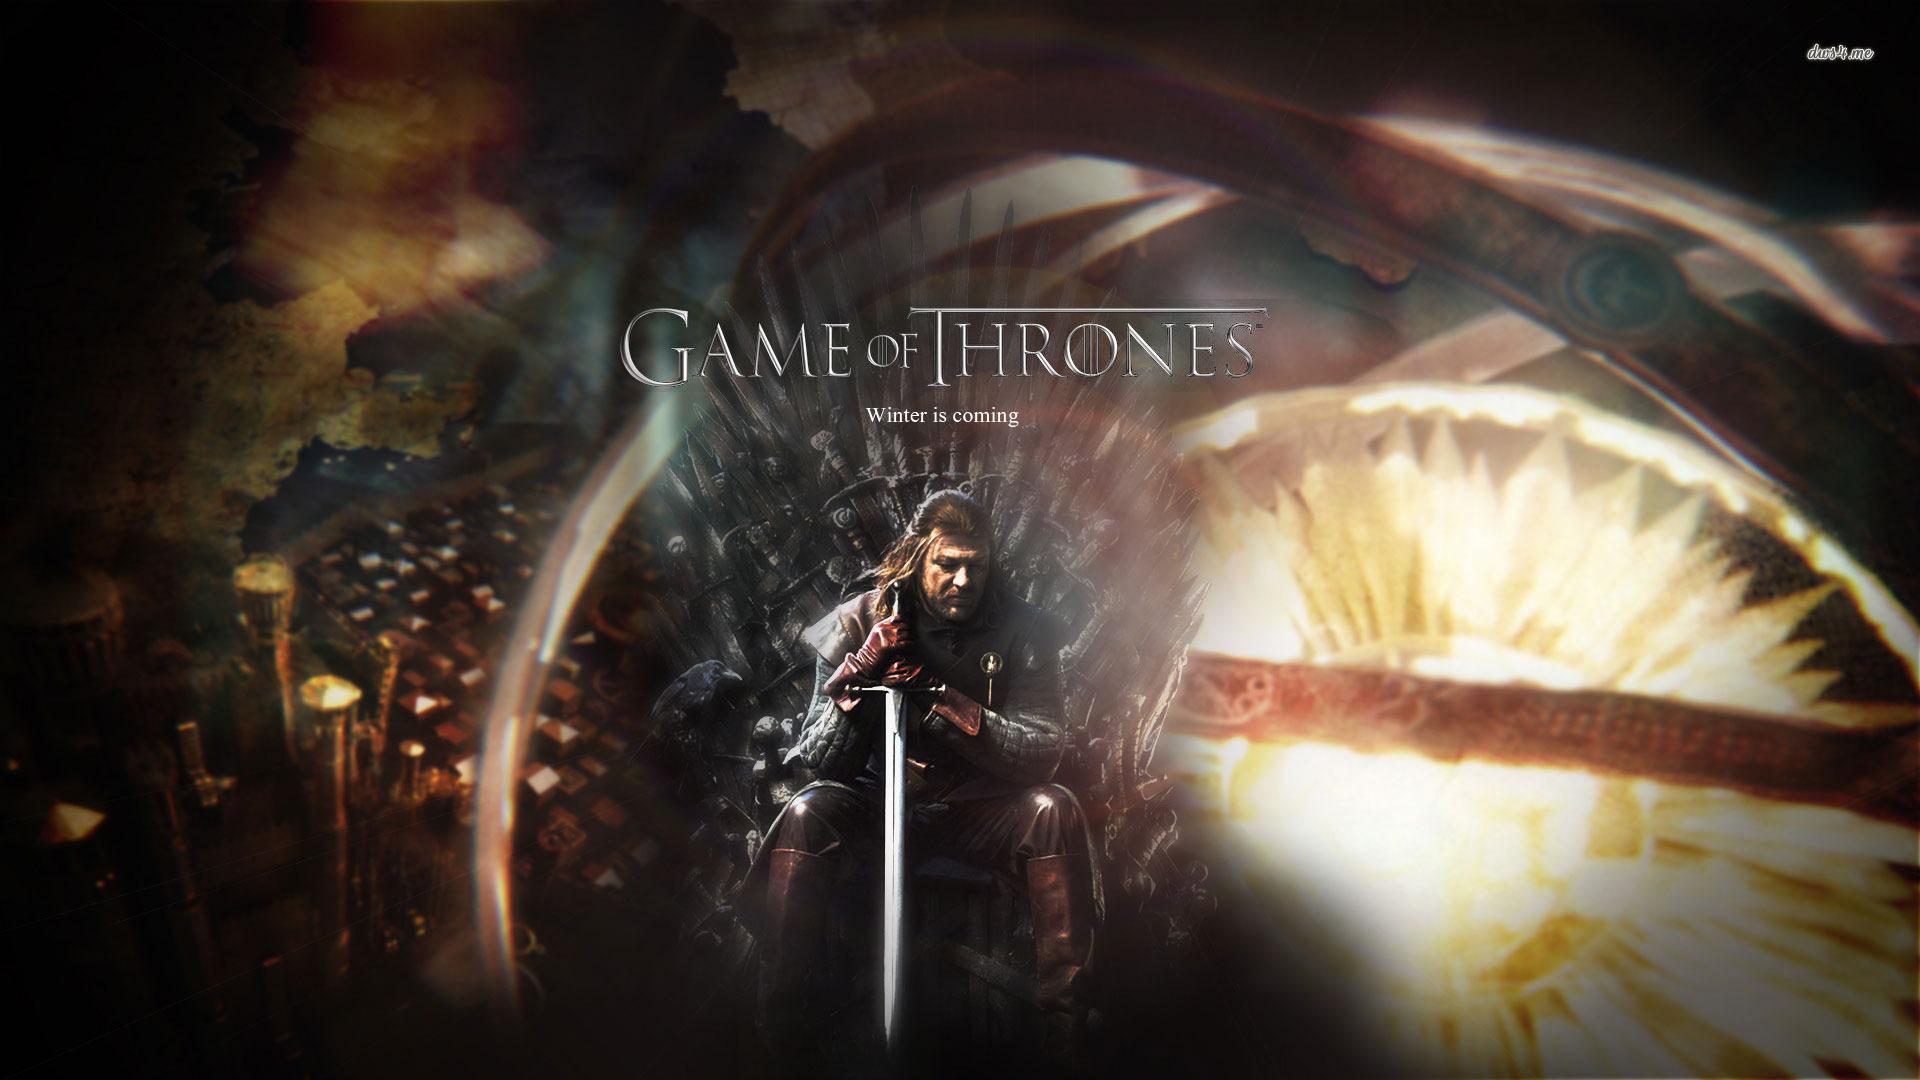 Game of Thrones is Coming wallpaper Show